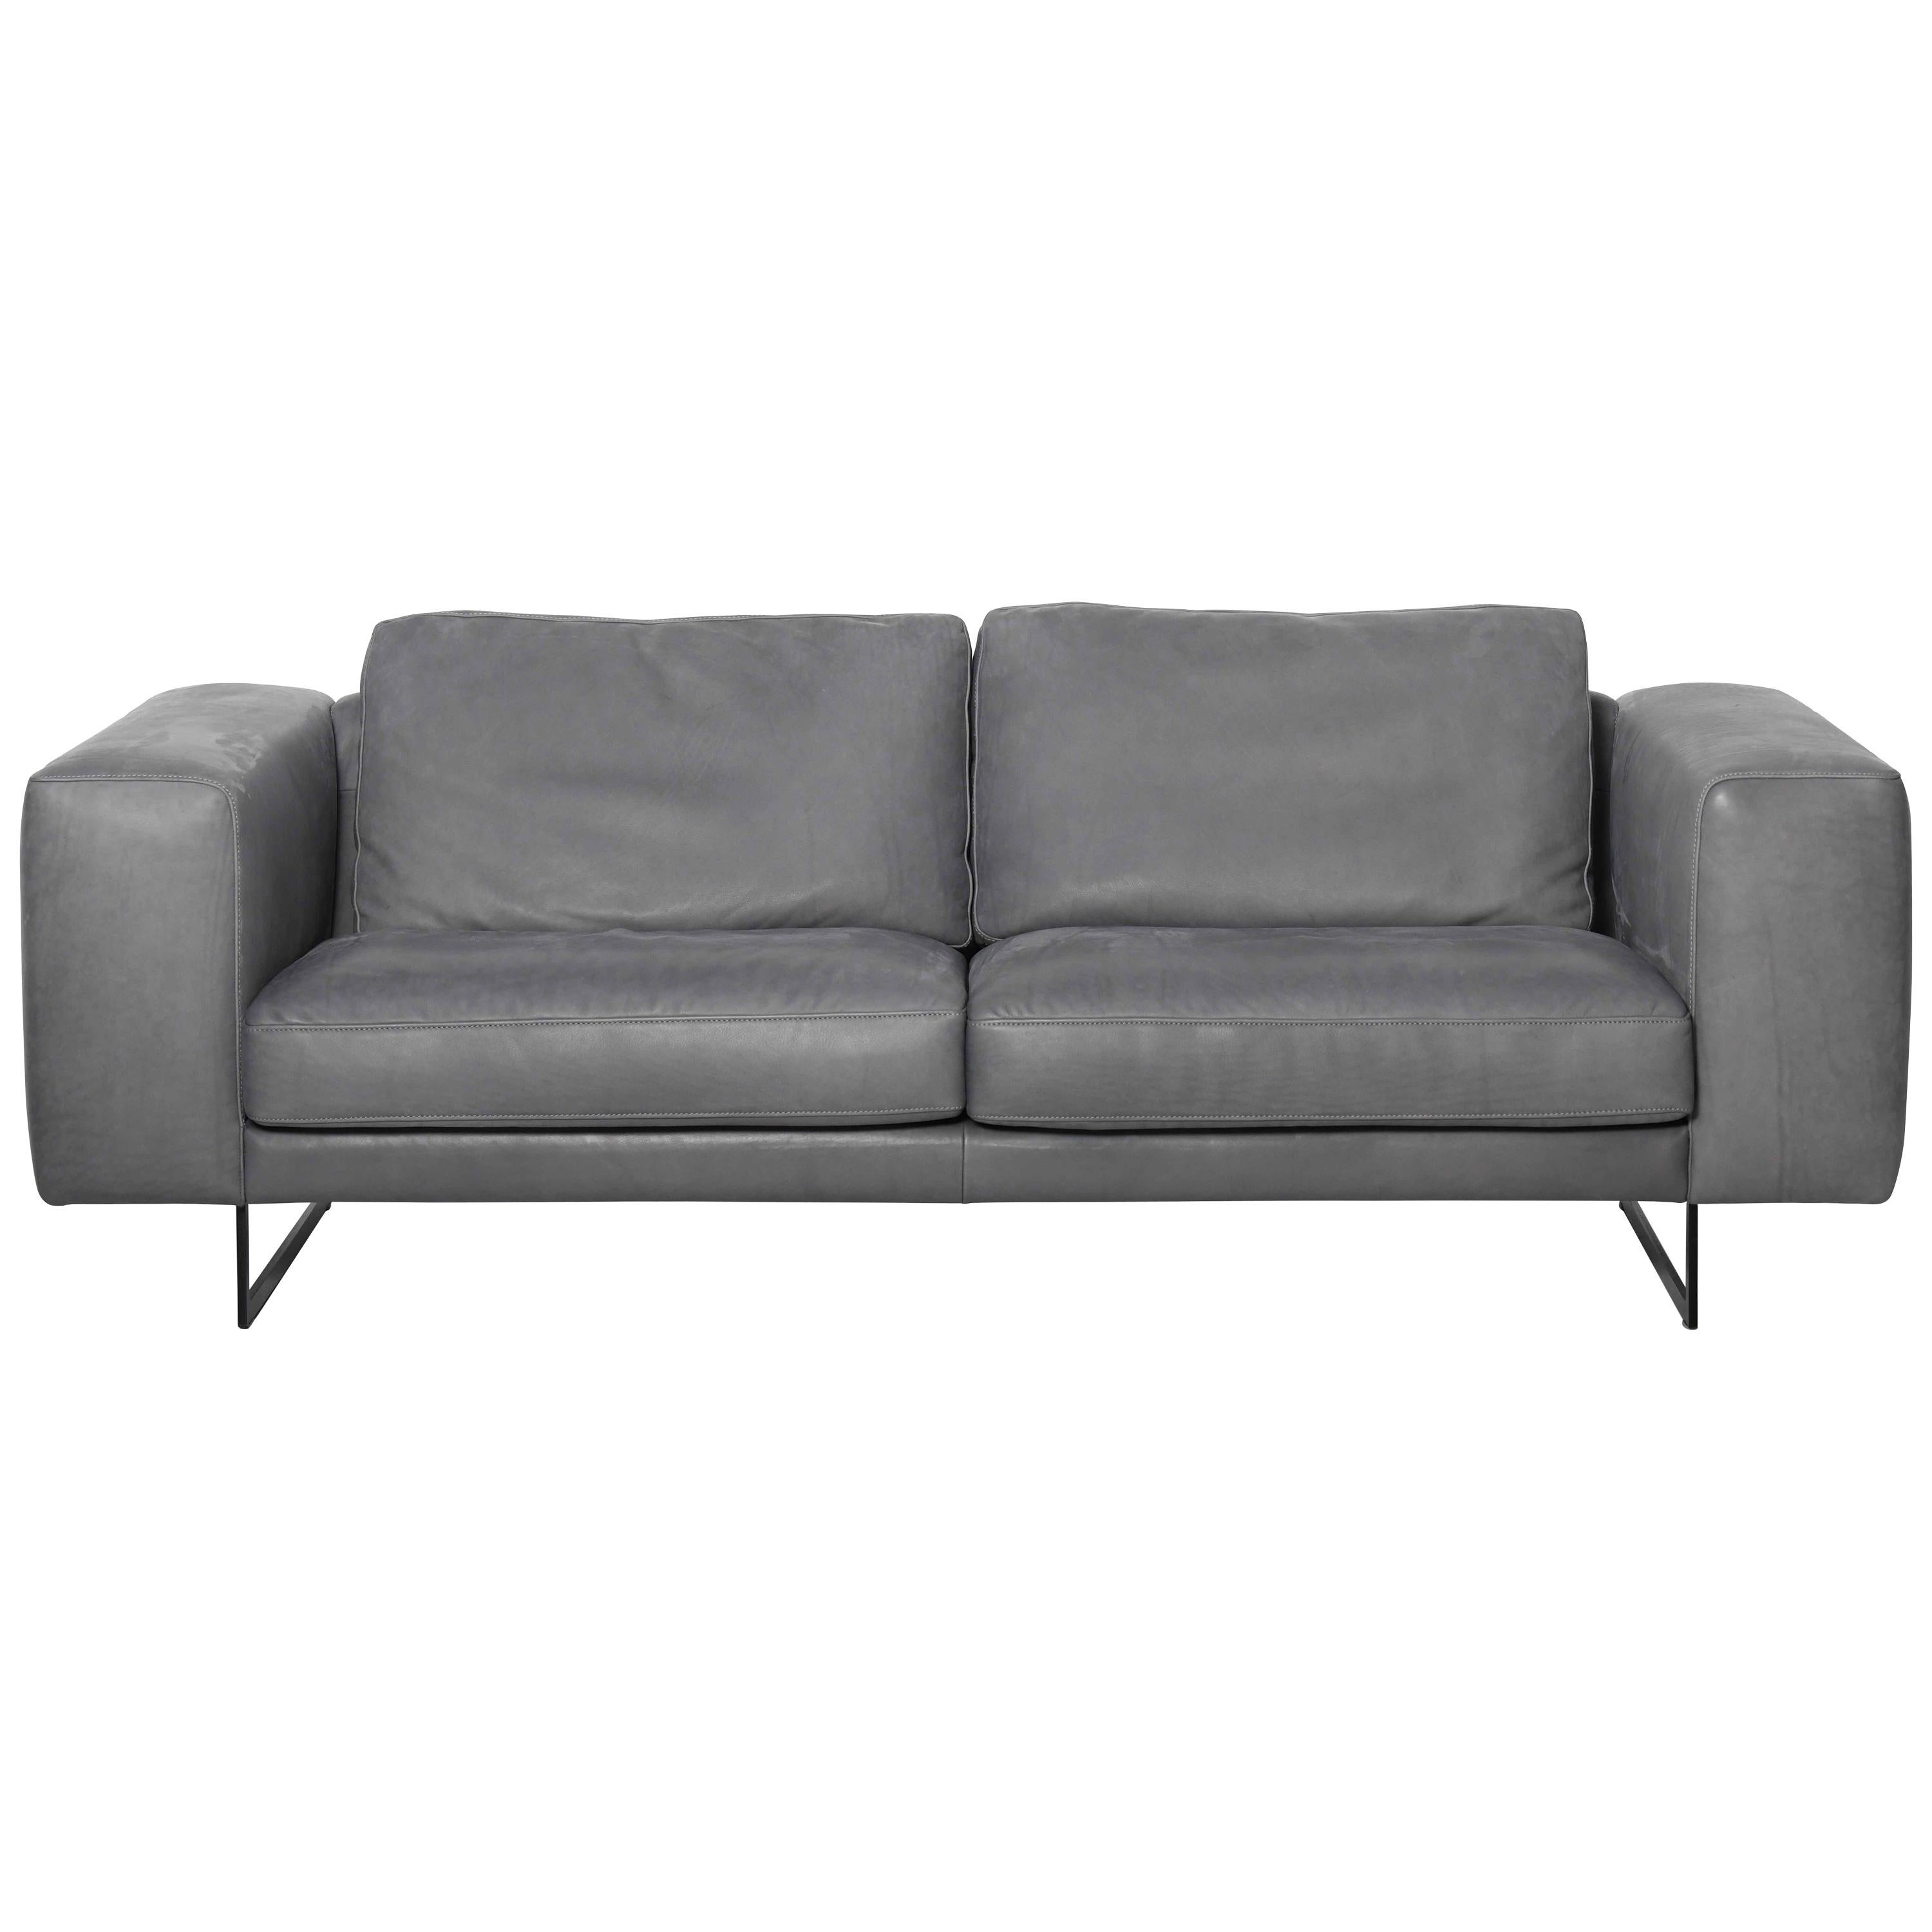 De Sede DS-748 Large Two-Seat Sofa in Paris Upholstery by Claudio Bellini